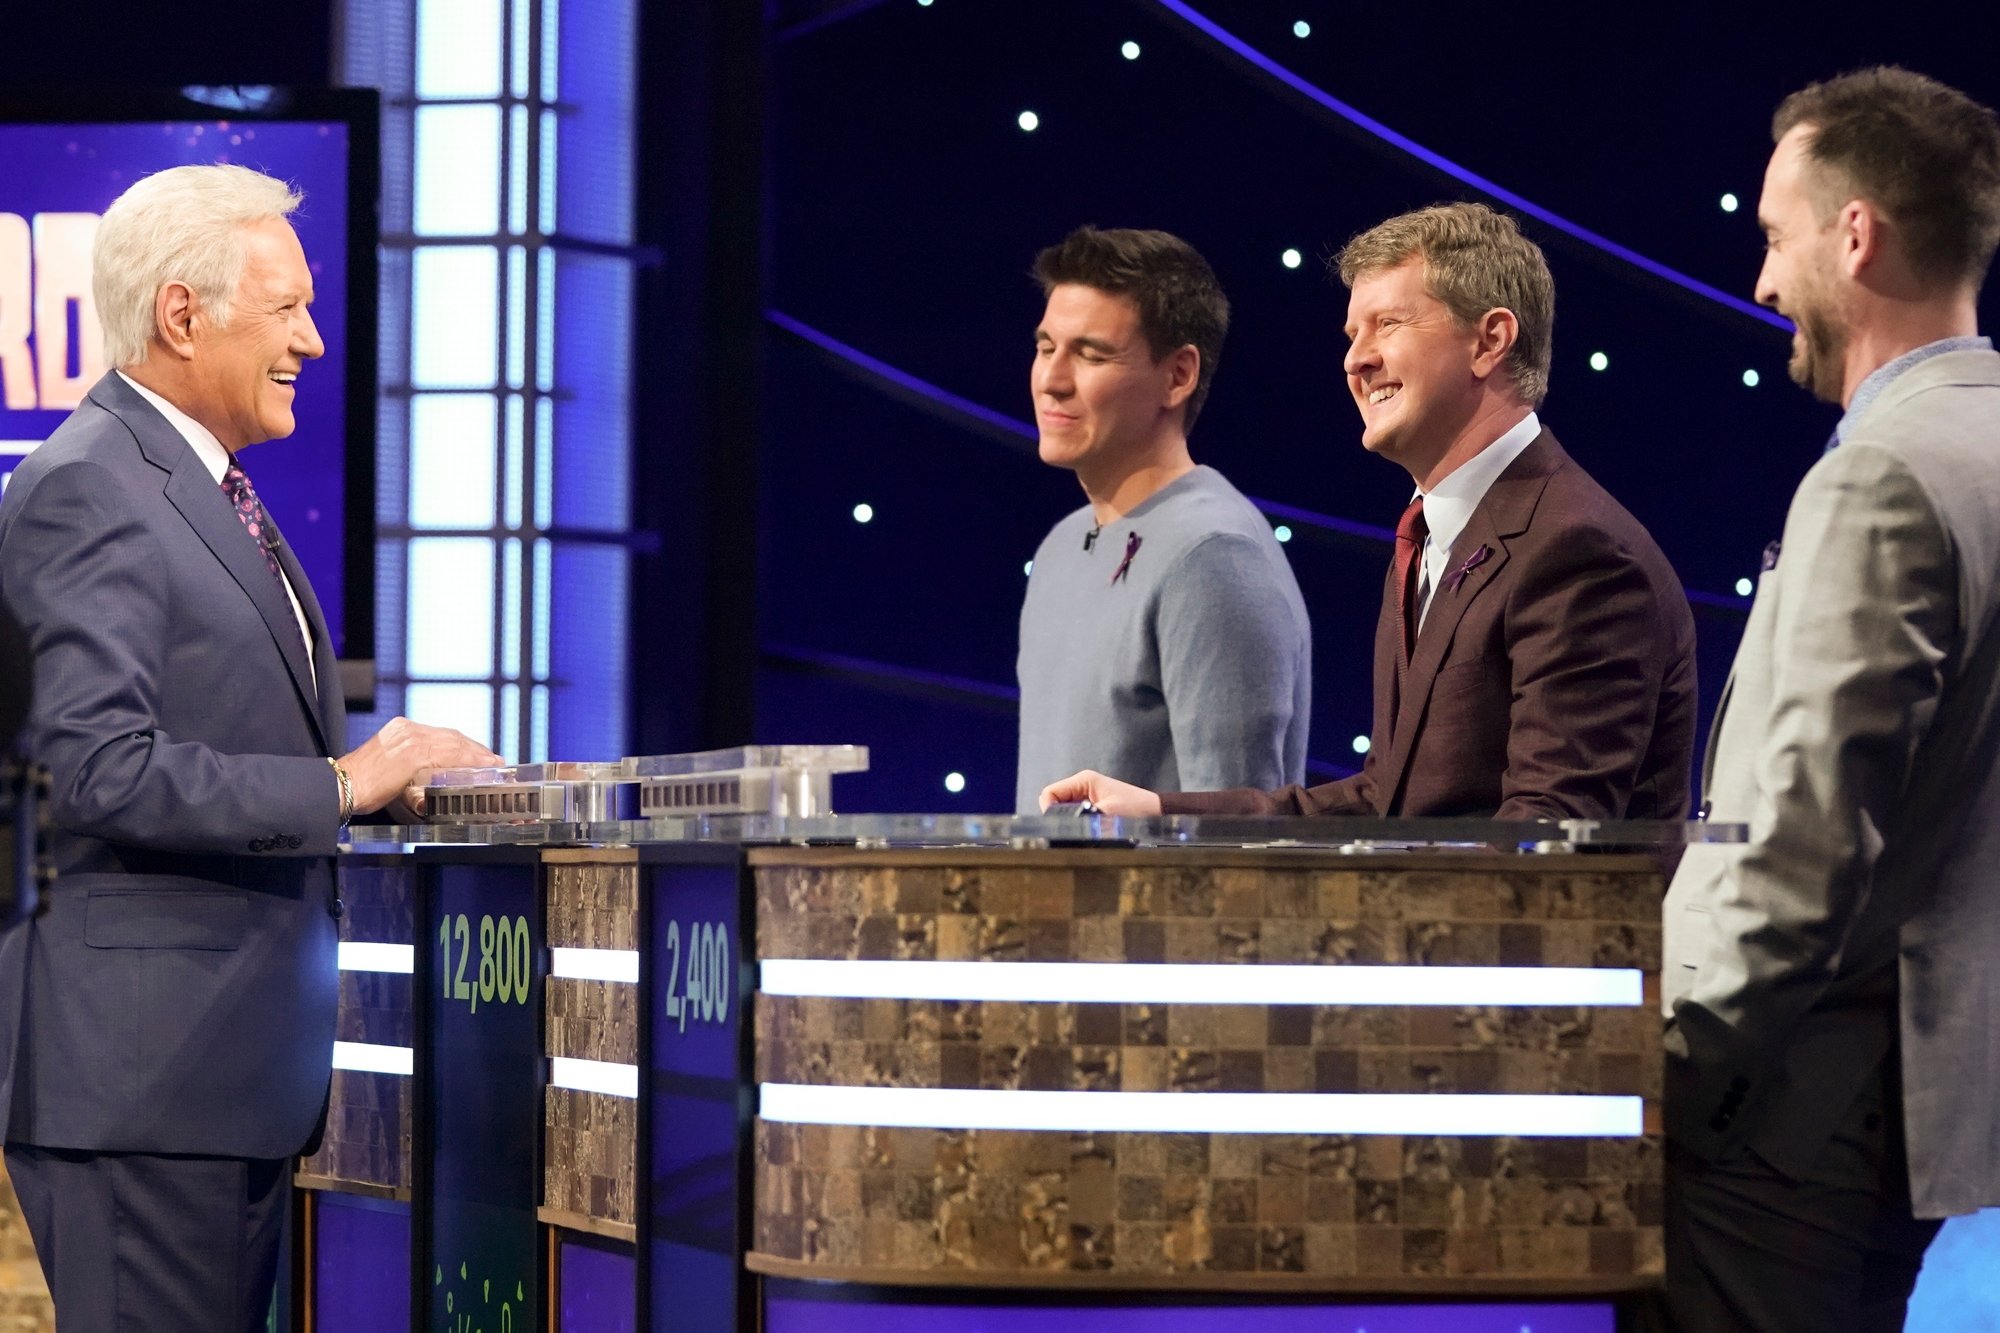 'Jeopardy!' Alex Trebek, James Holzhauer, Ken Jennings, and Brad Rutter in preparation smiling dressed in formal clothes with contestant podiums in between them